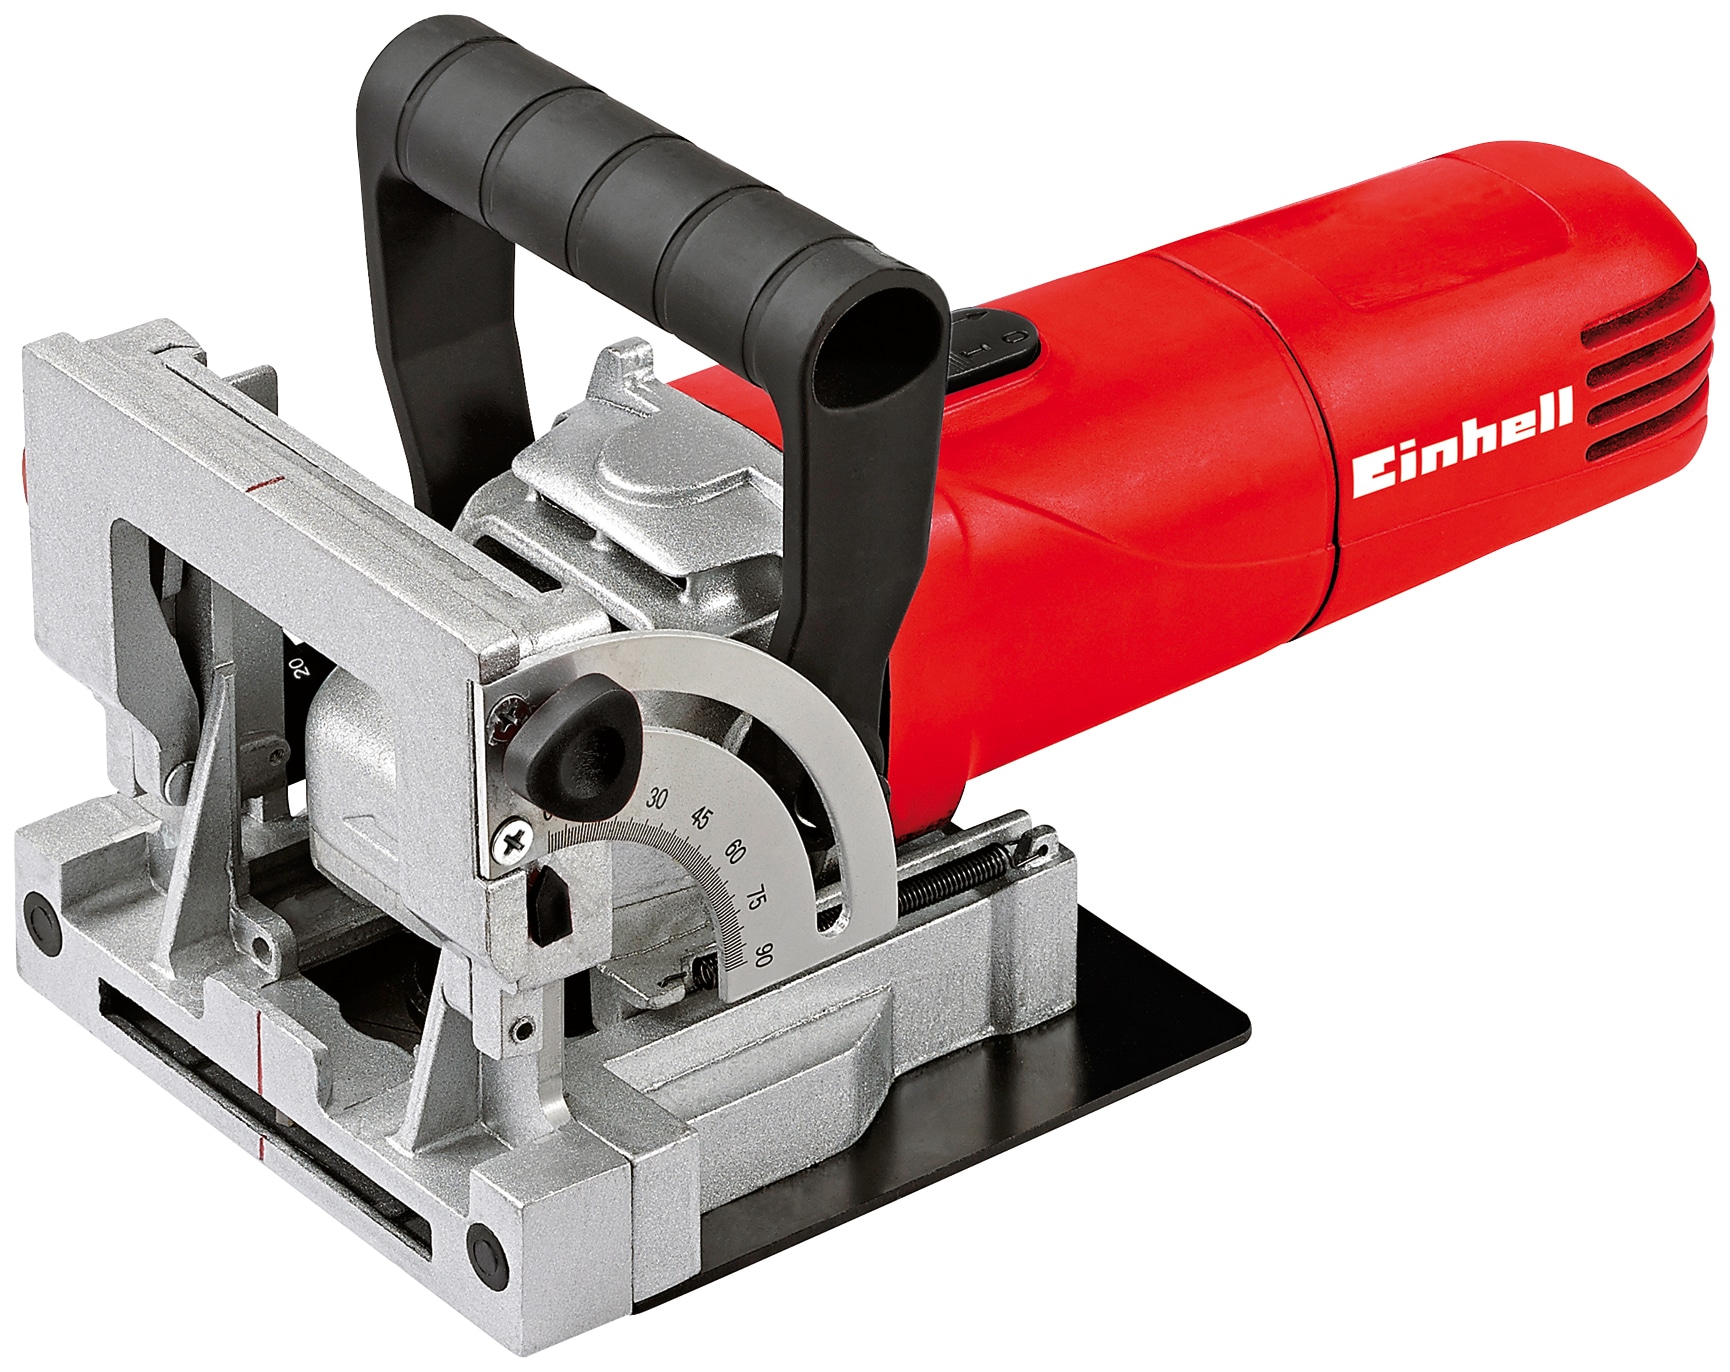 Einhell TC-BJ 900 Biscuit Jointer 860W 240V